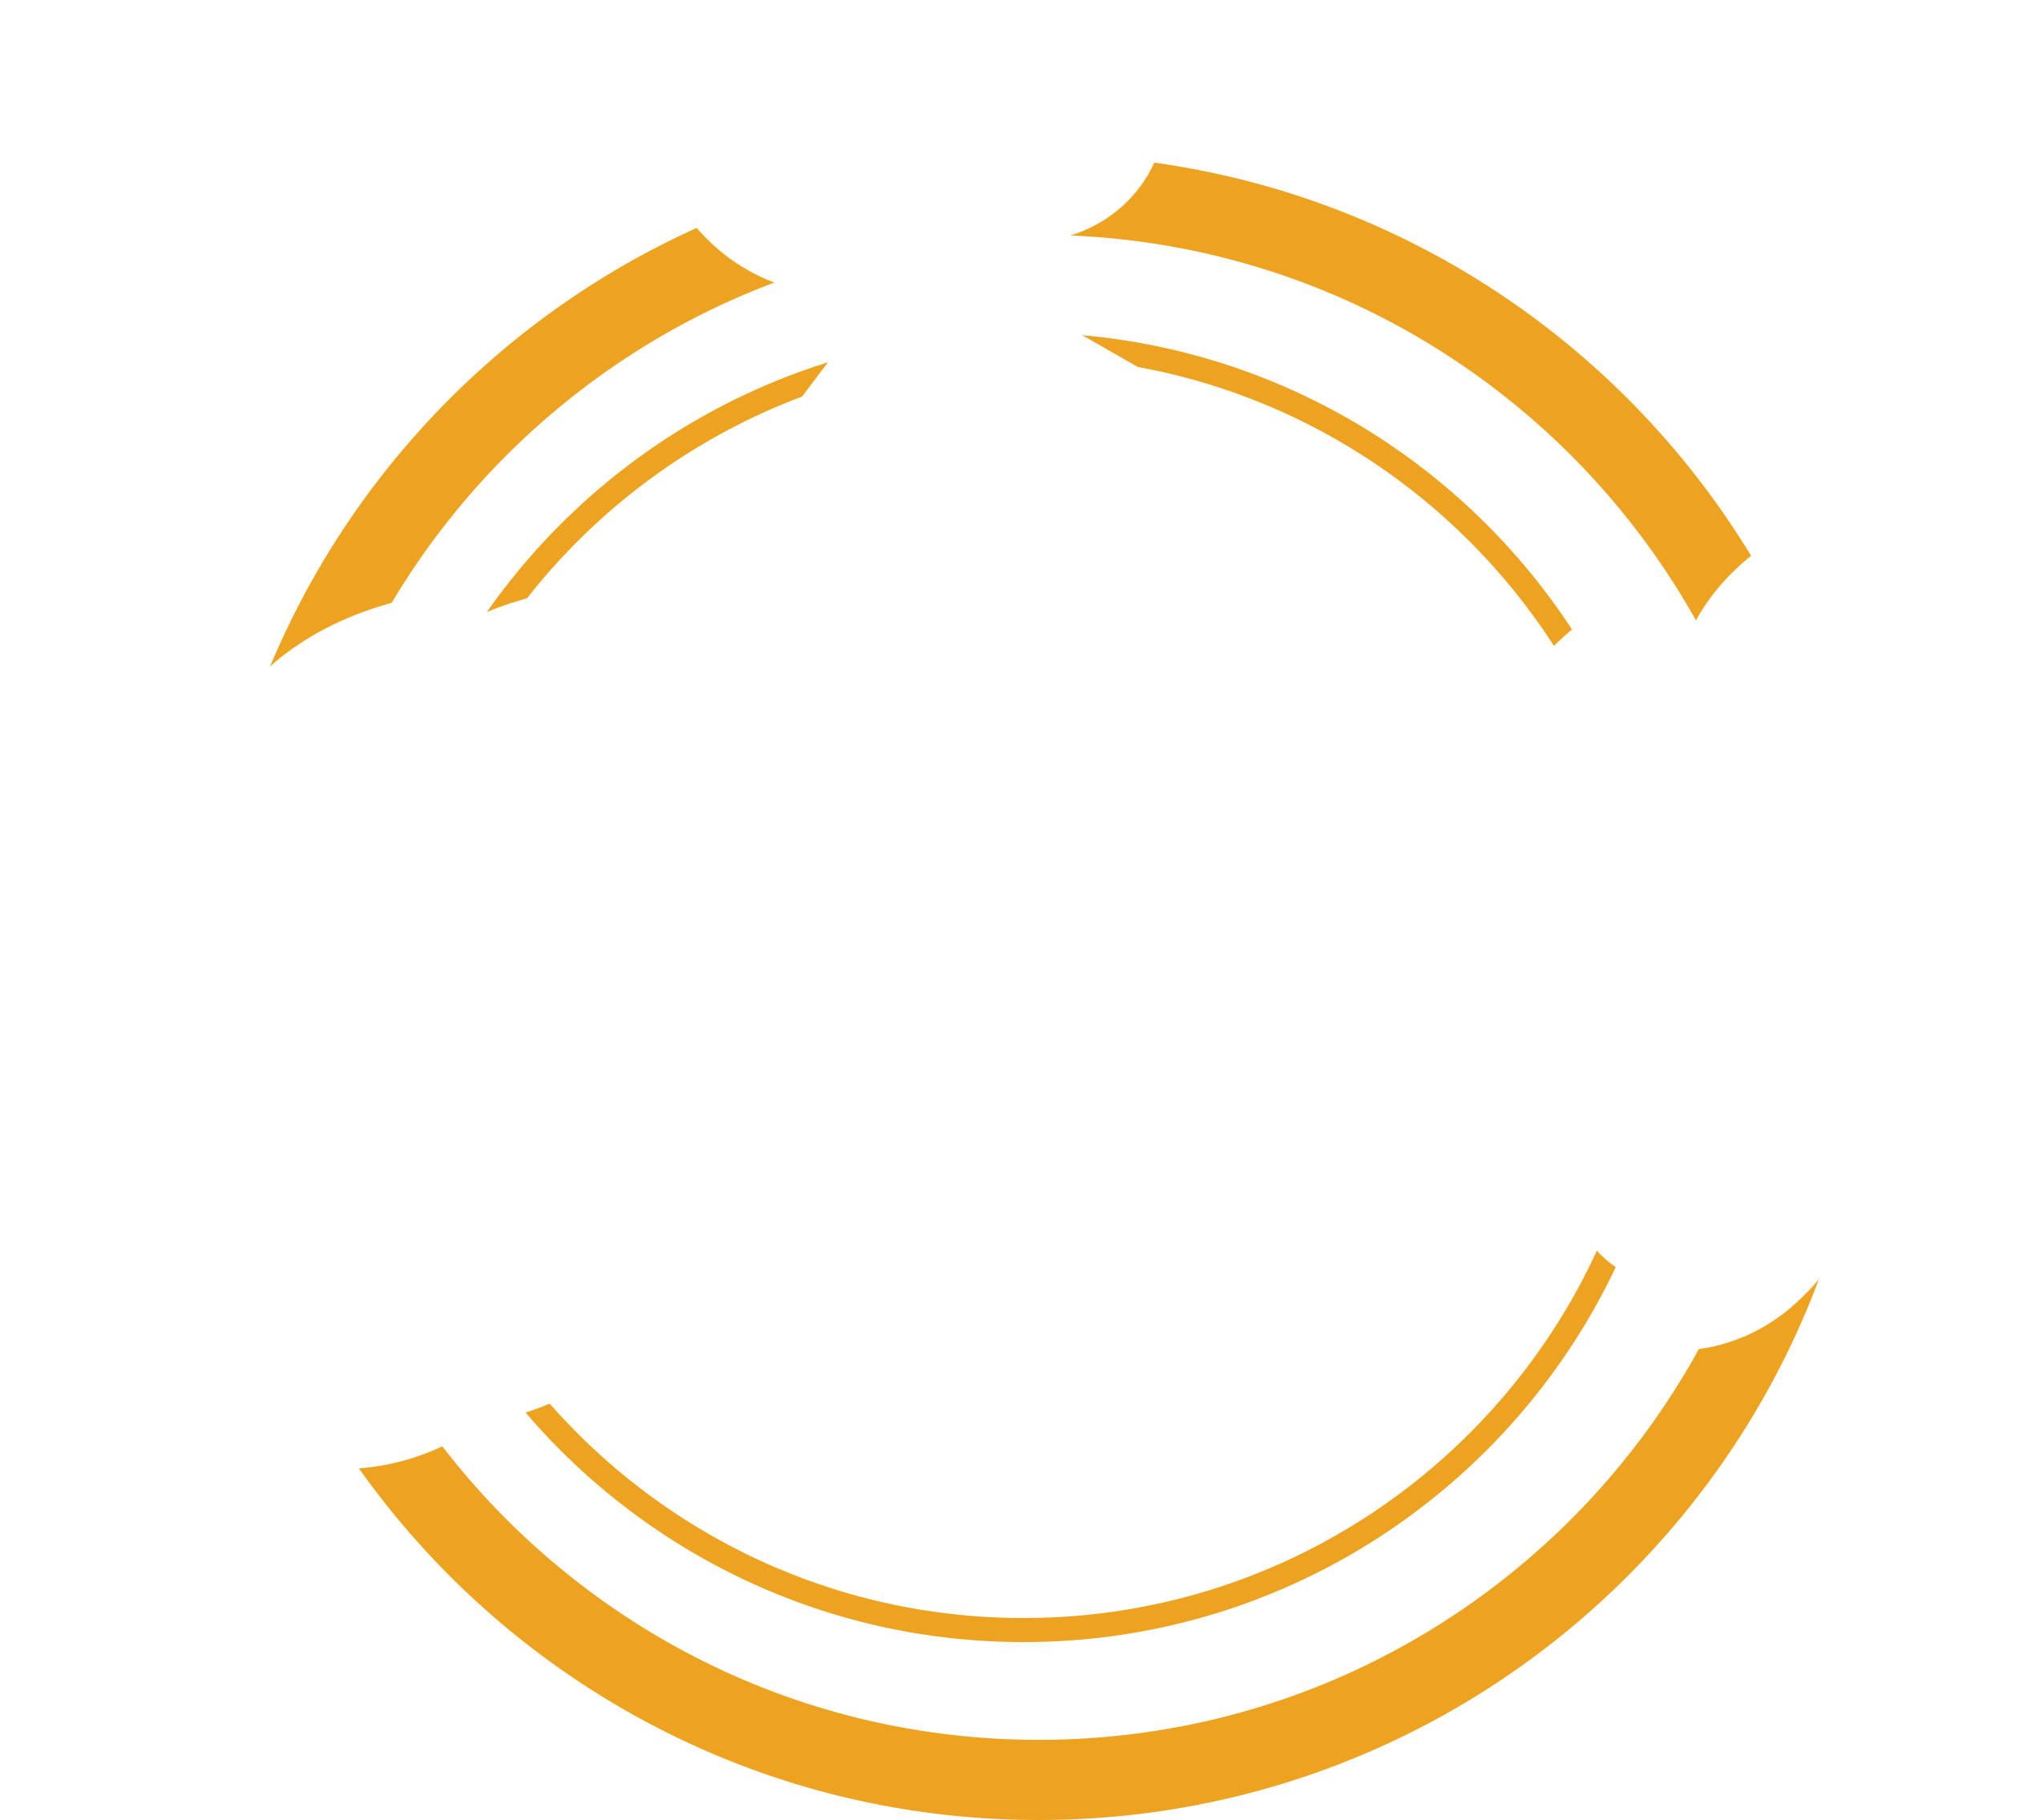 Matheson Sweets & Catering